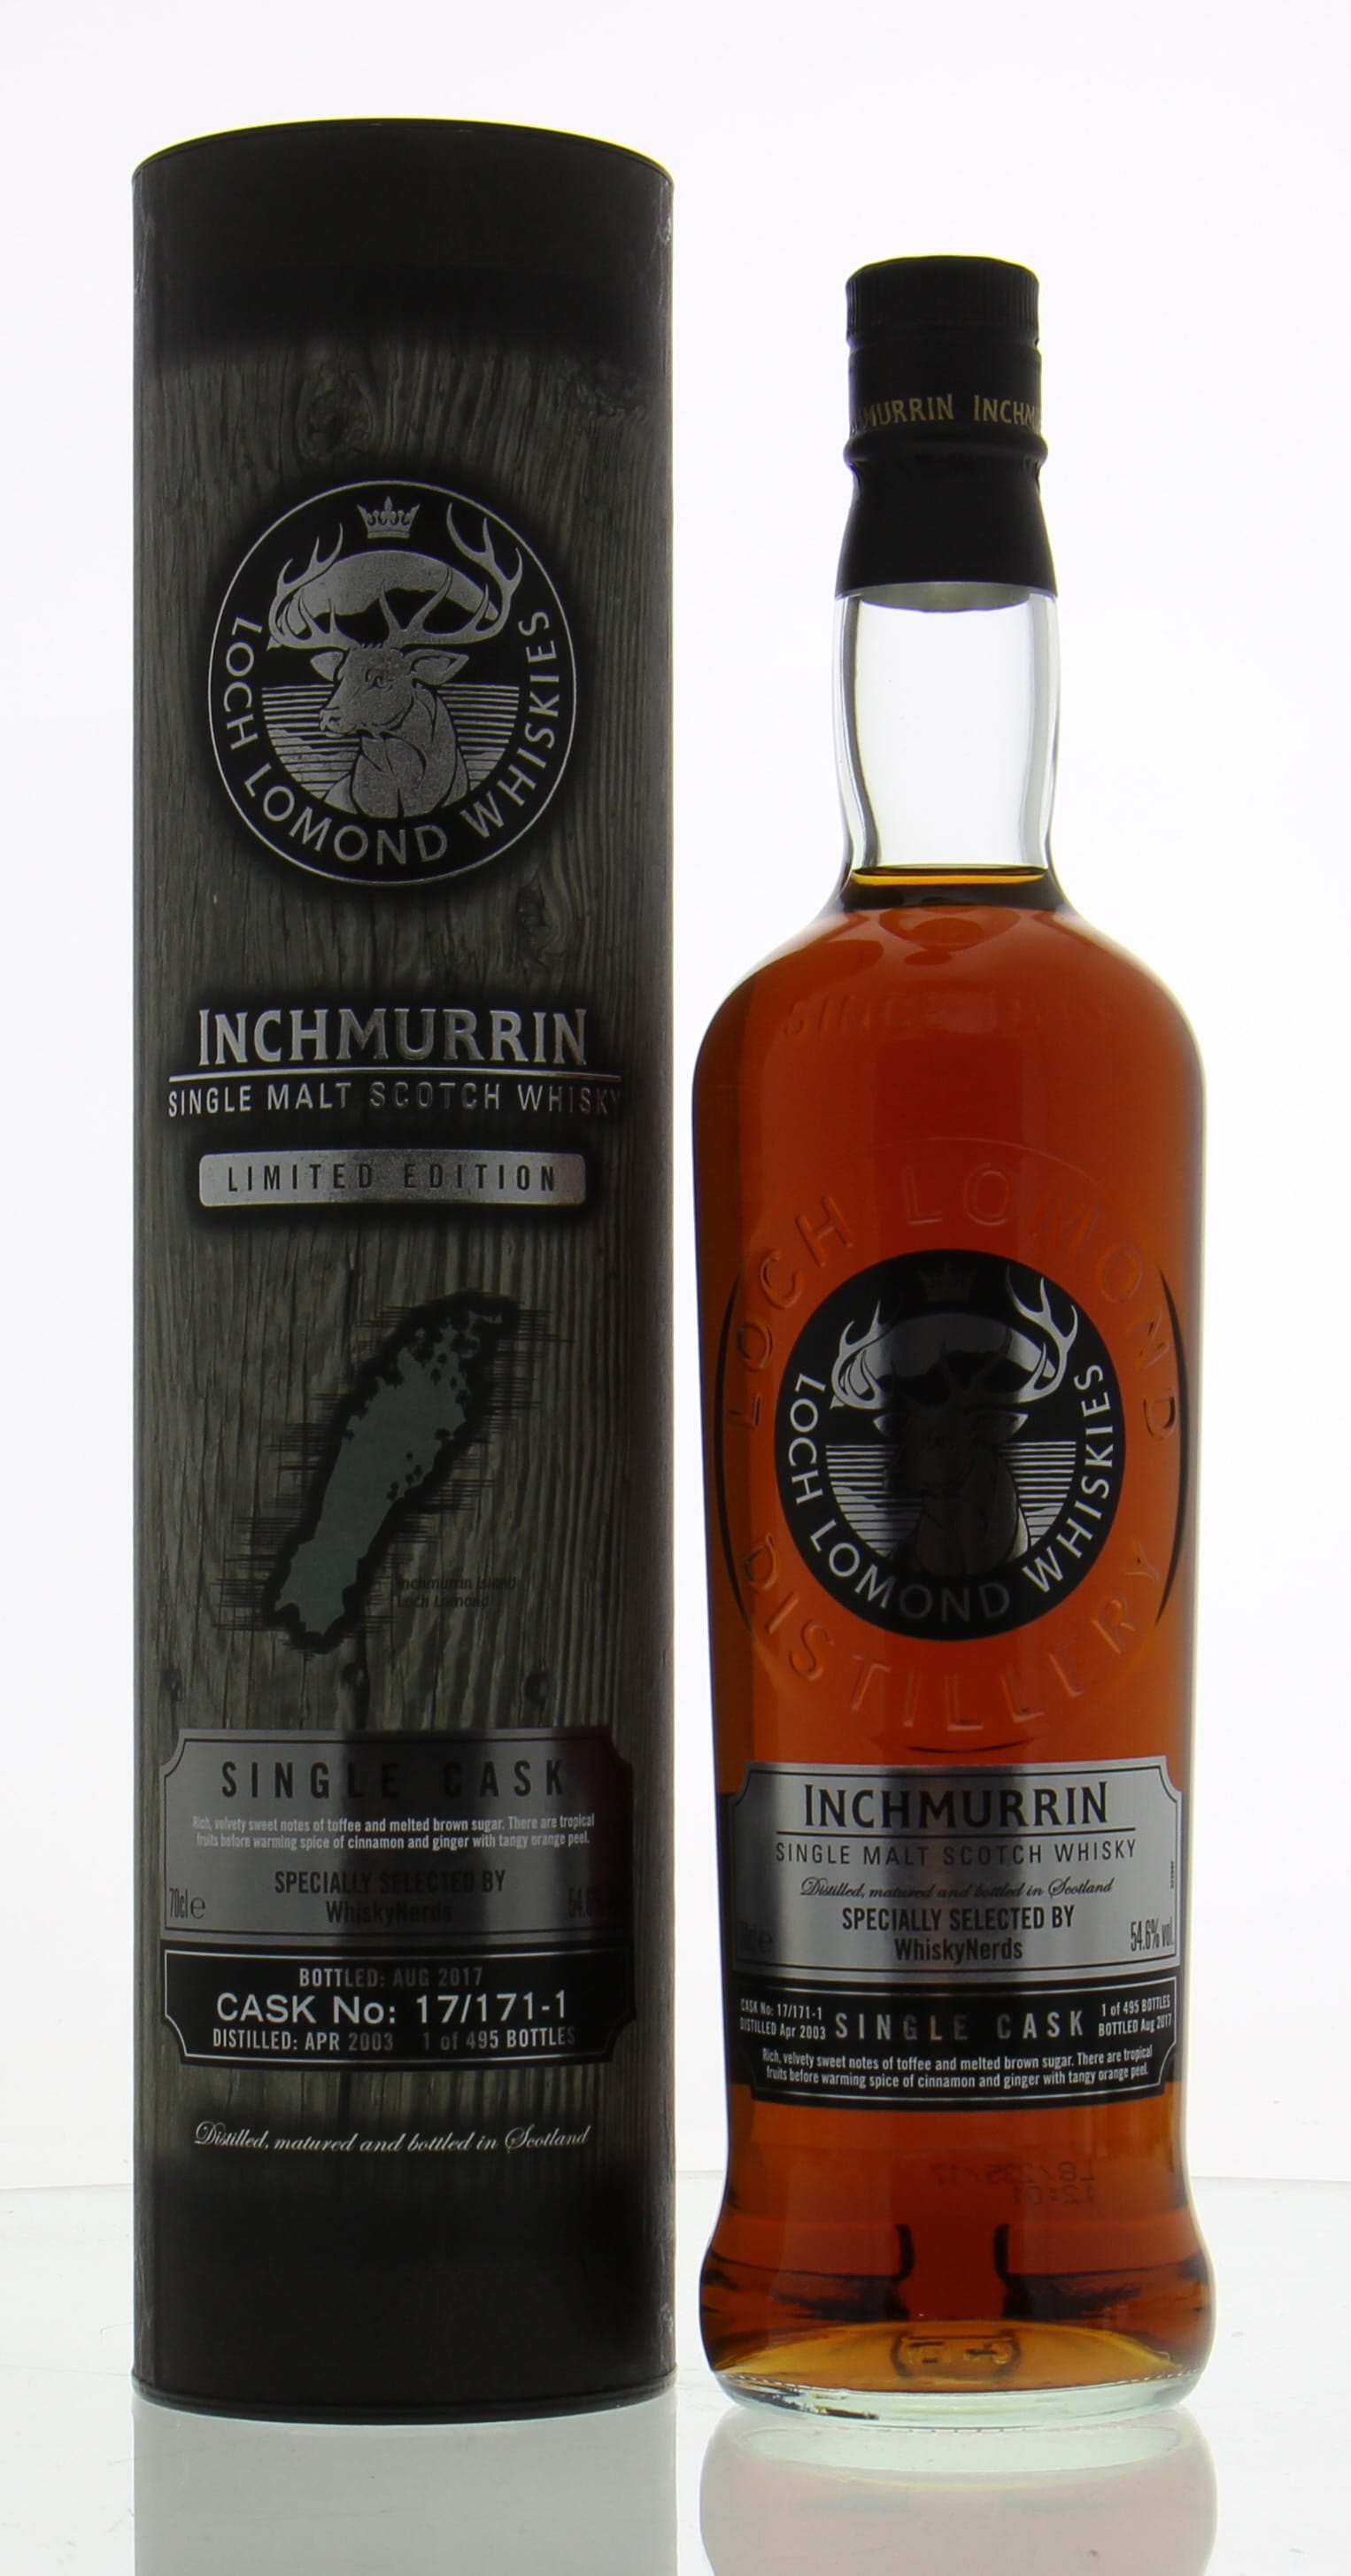 Inchmurrin - 14 Years Old Executive For WhiskyNerds Cask:17/171-1 54.6% 2003